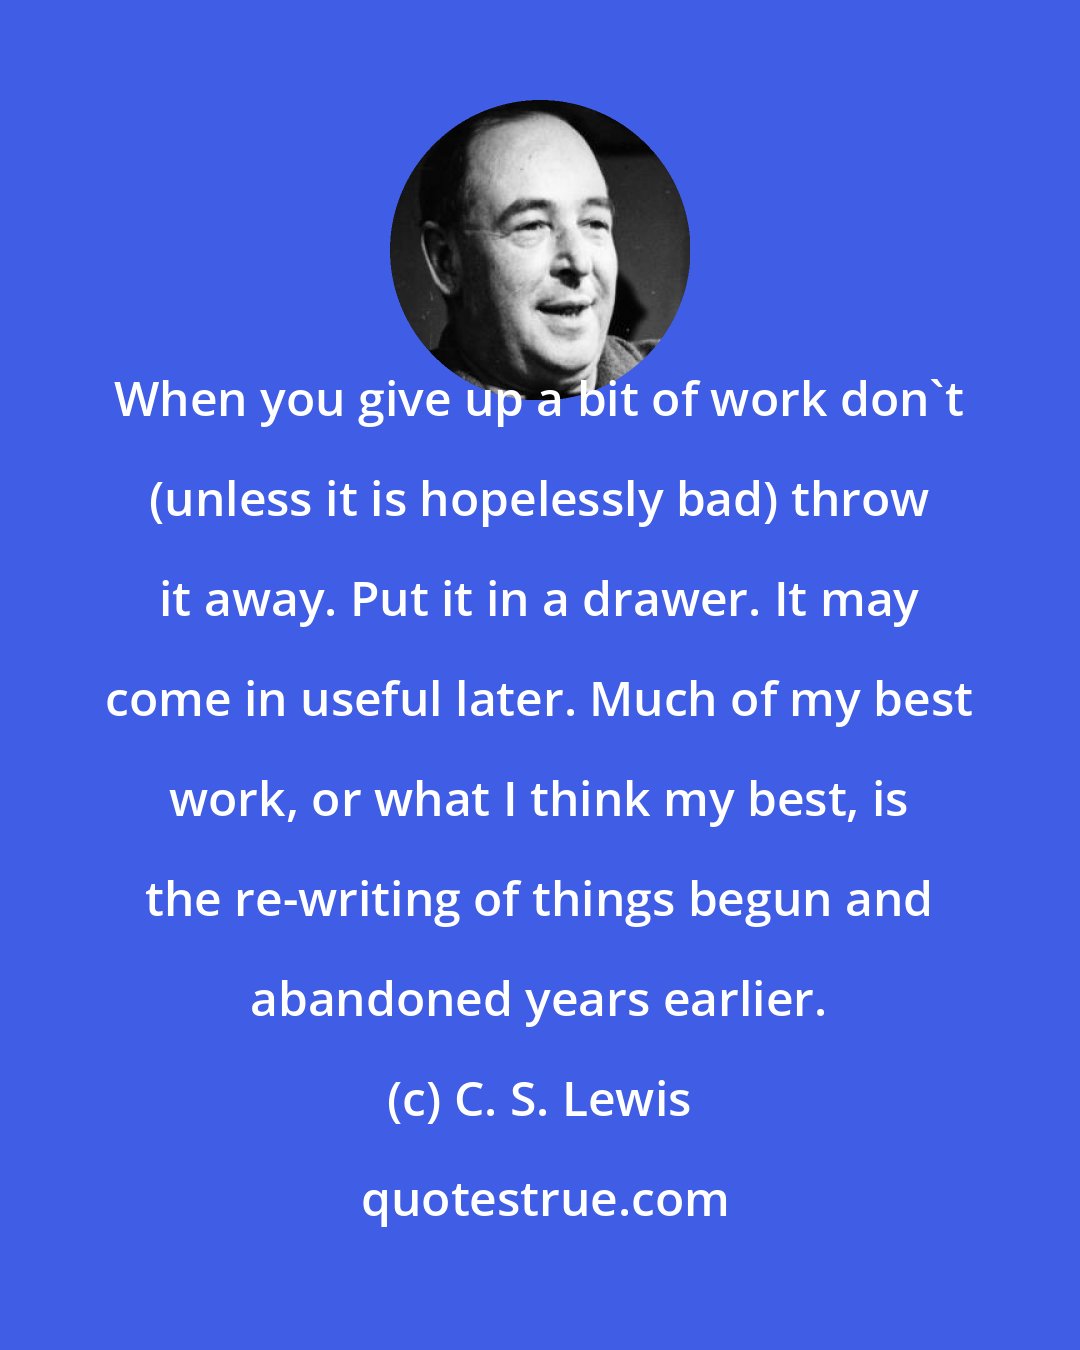 C. S. Lewis: When you give up a bit of work don't (unless it is hopelessly bad) throw it away. Put it in a drawer. It may come in useful later. Much of my best work, or what I think my best, is the re-writing of things begun and abandoned years earlier.